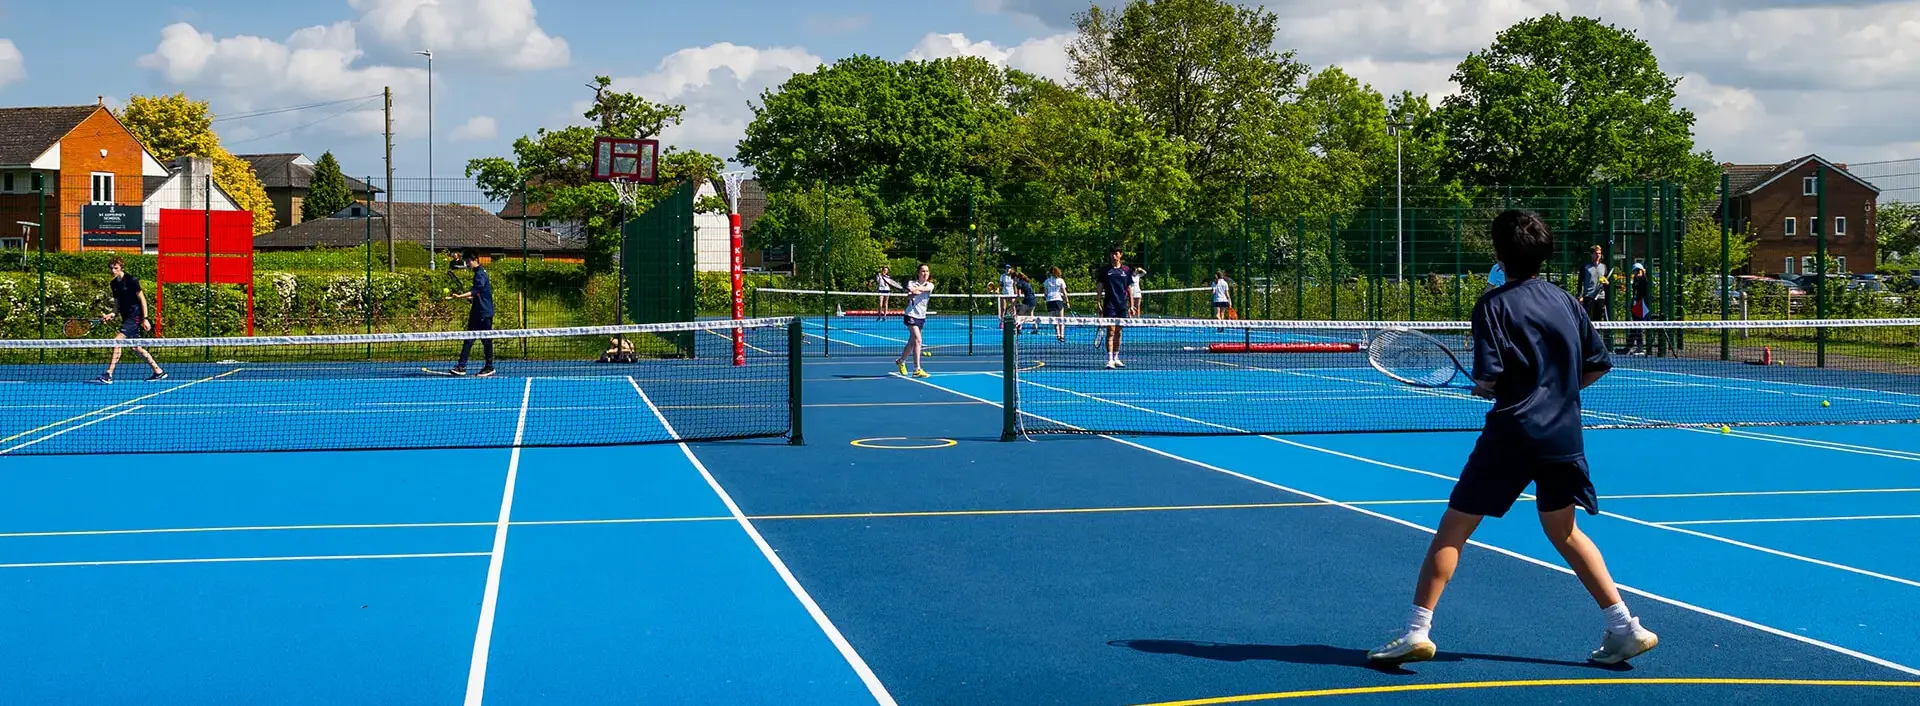 Sports facilities at Kent College Canterbury are available to hire